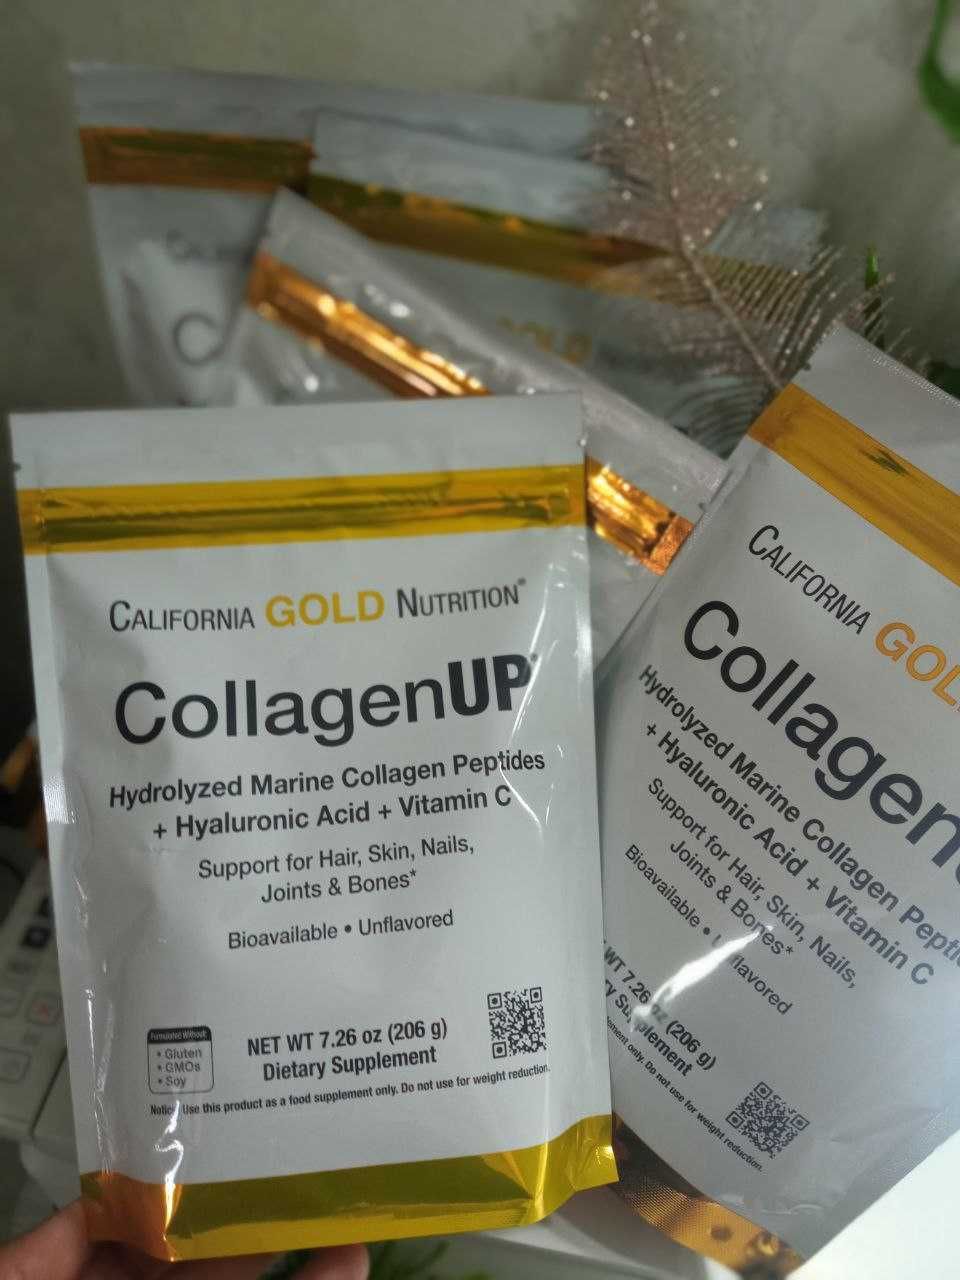 California Gold Nutrition, CollagenUP, 206г.